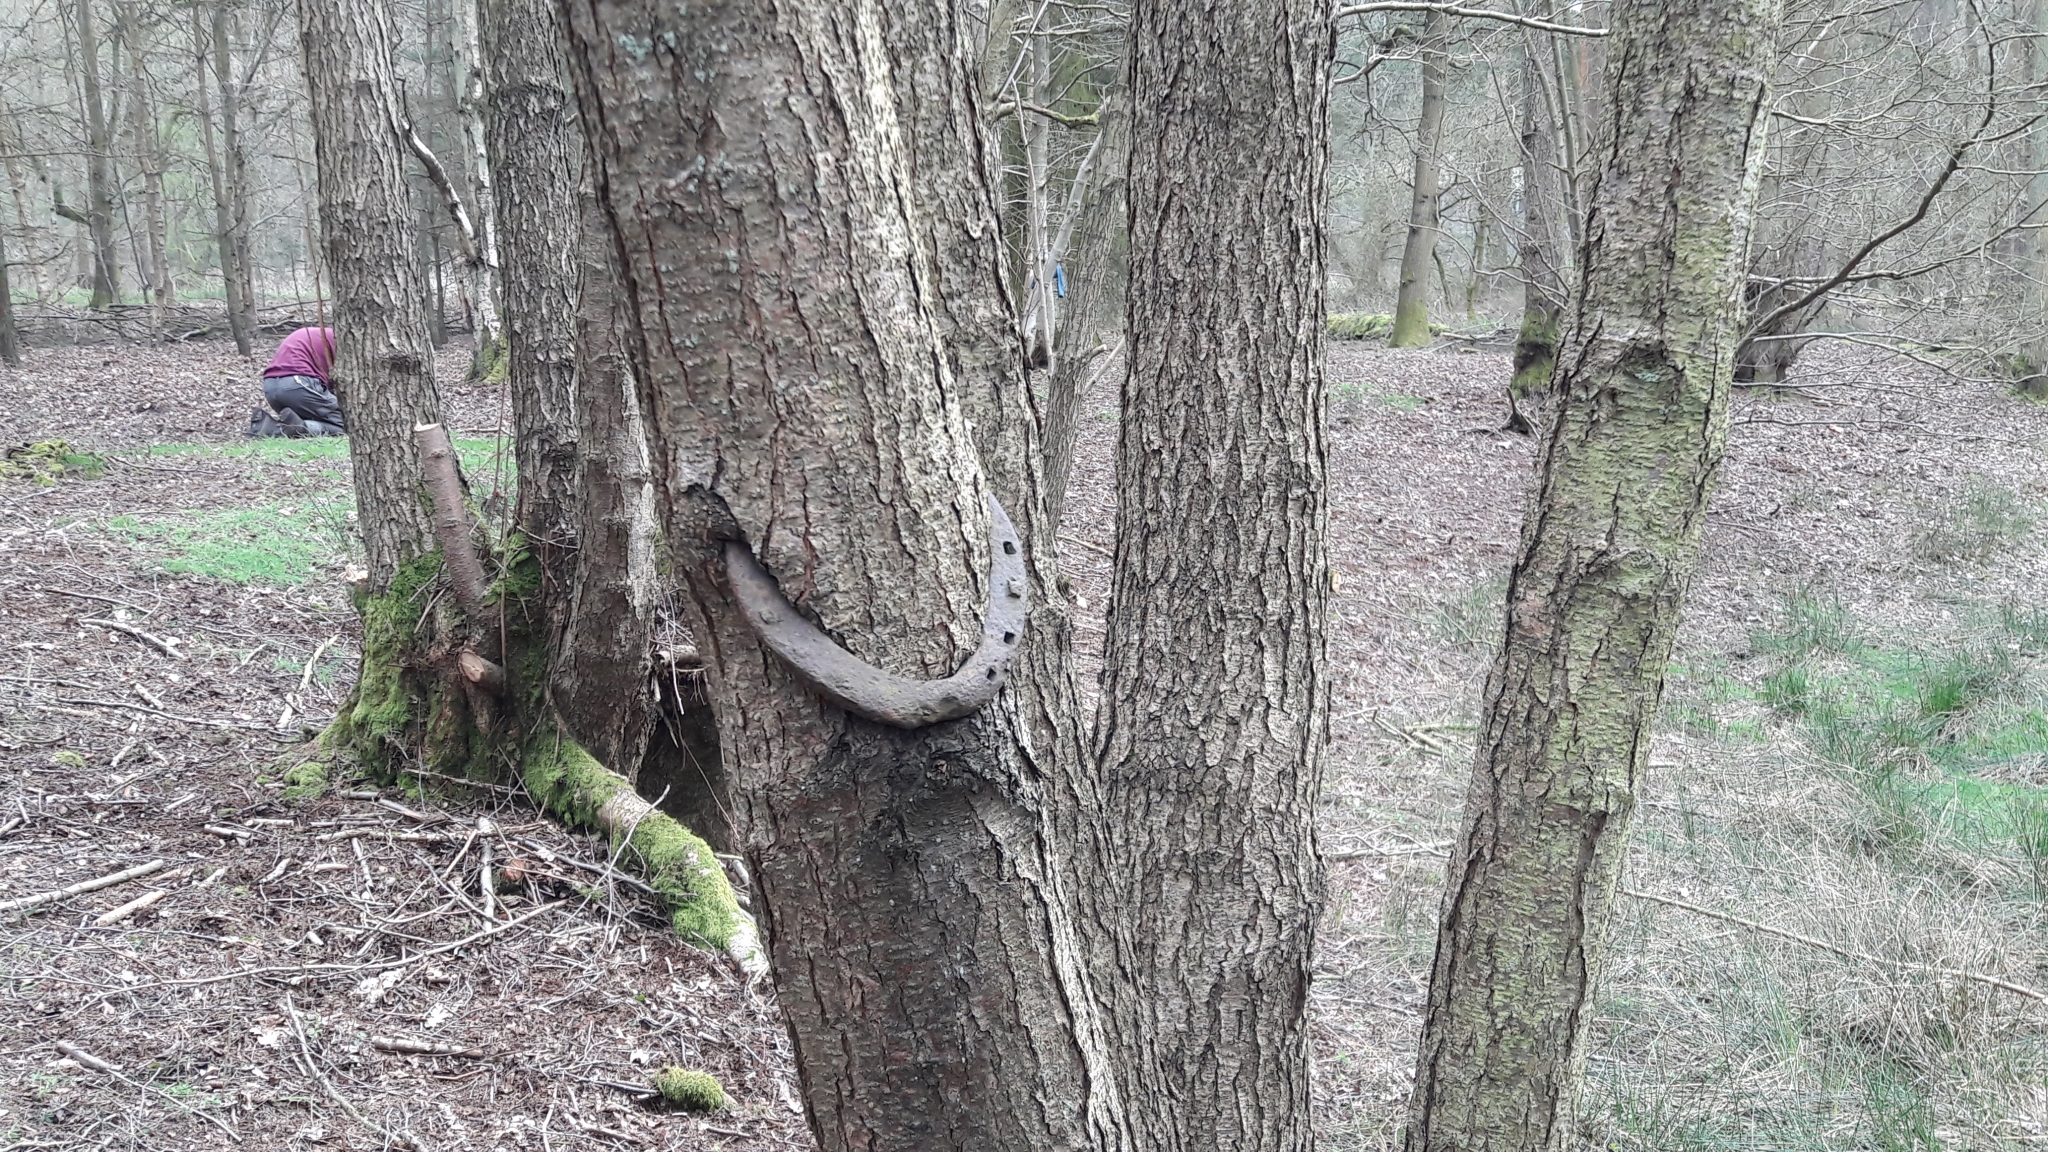 A photo from the FoTF Conservation Event - April 2018 - Improving habitat at High Lodge : A horse shoe attached to a tree